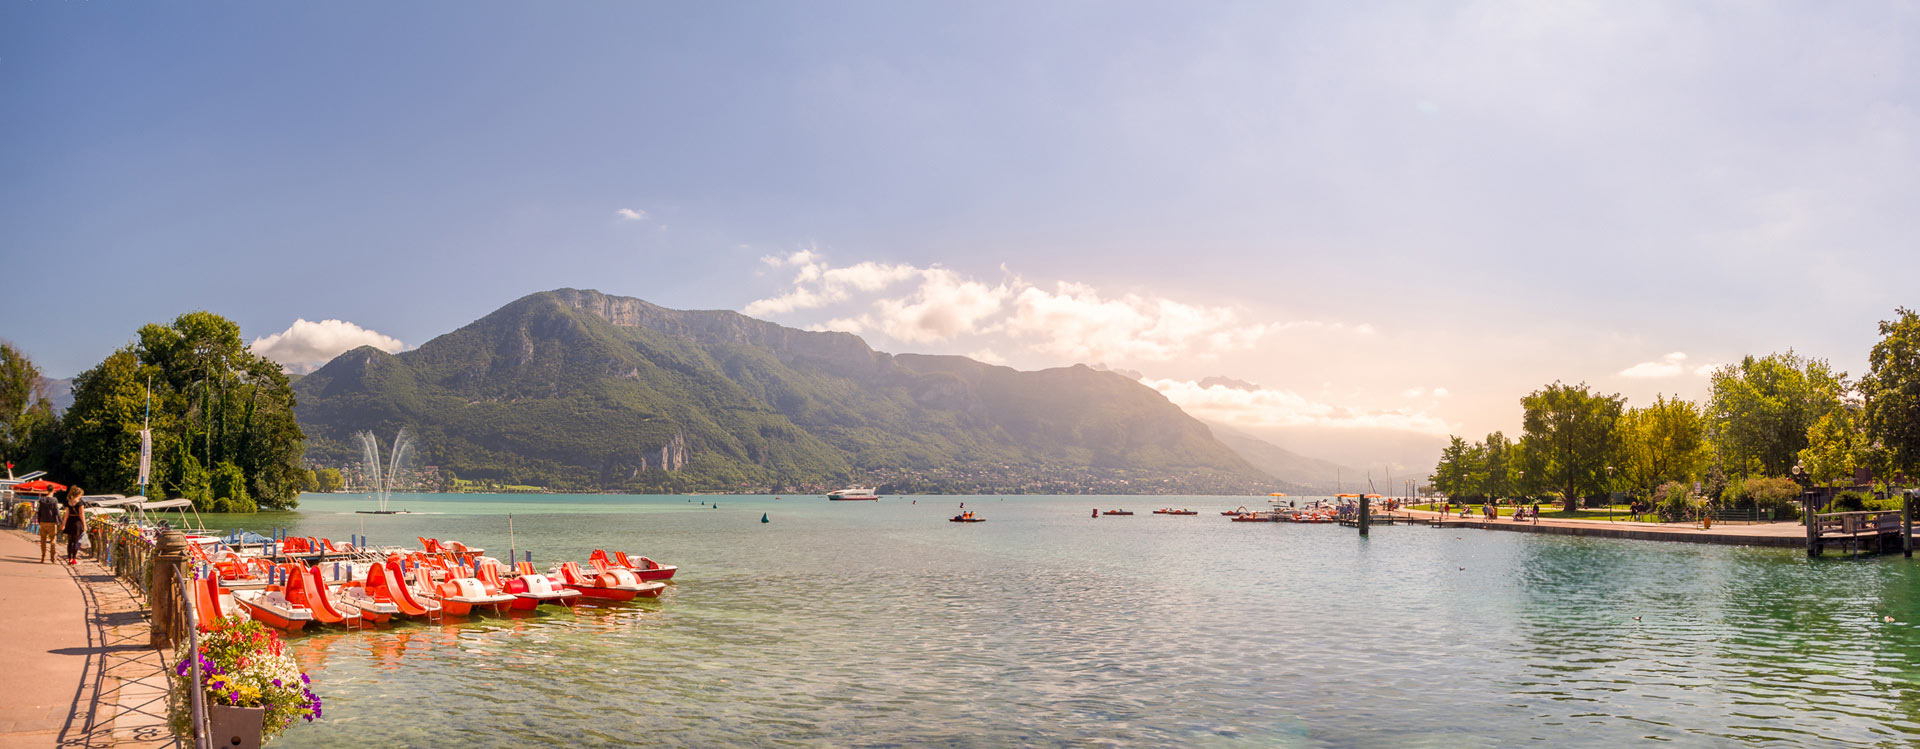 Nautical activities on Lake Annecy - things to do Annecy